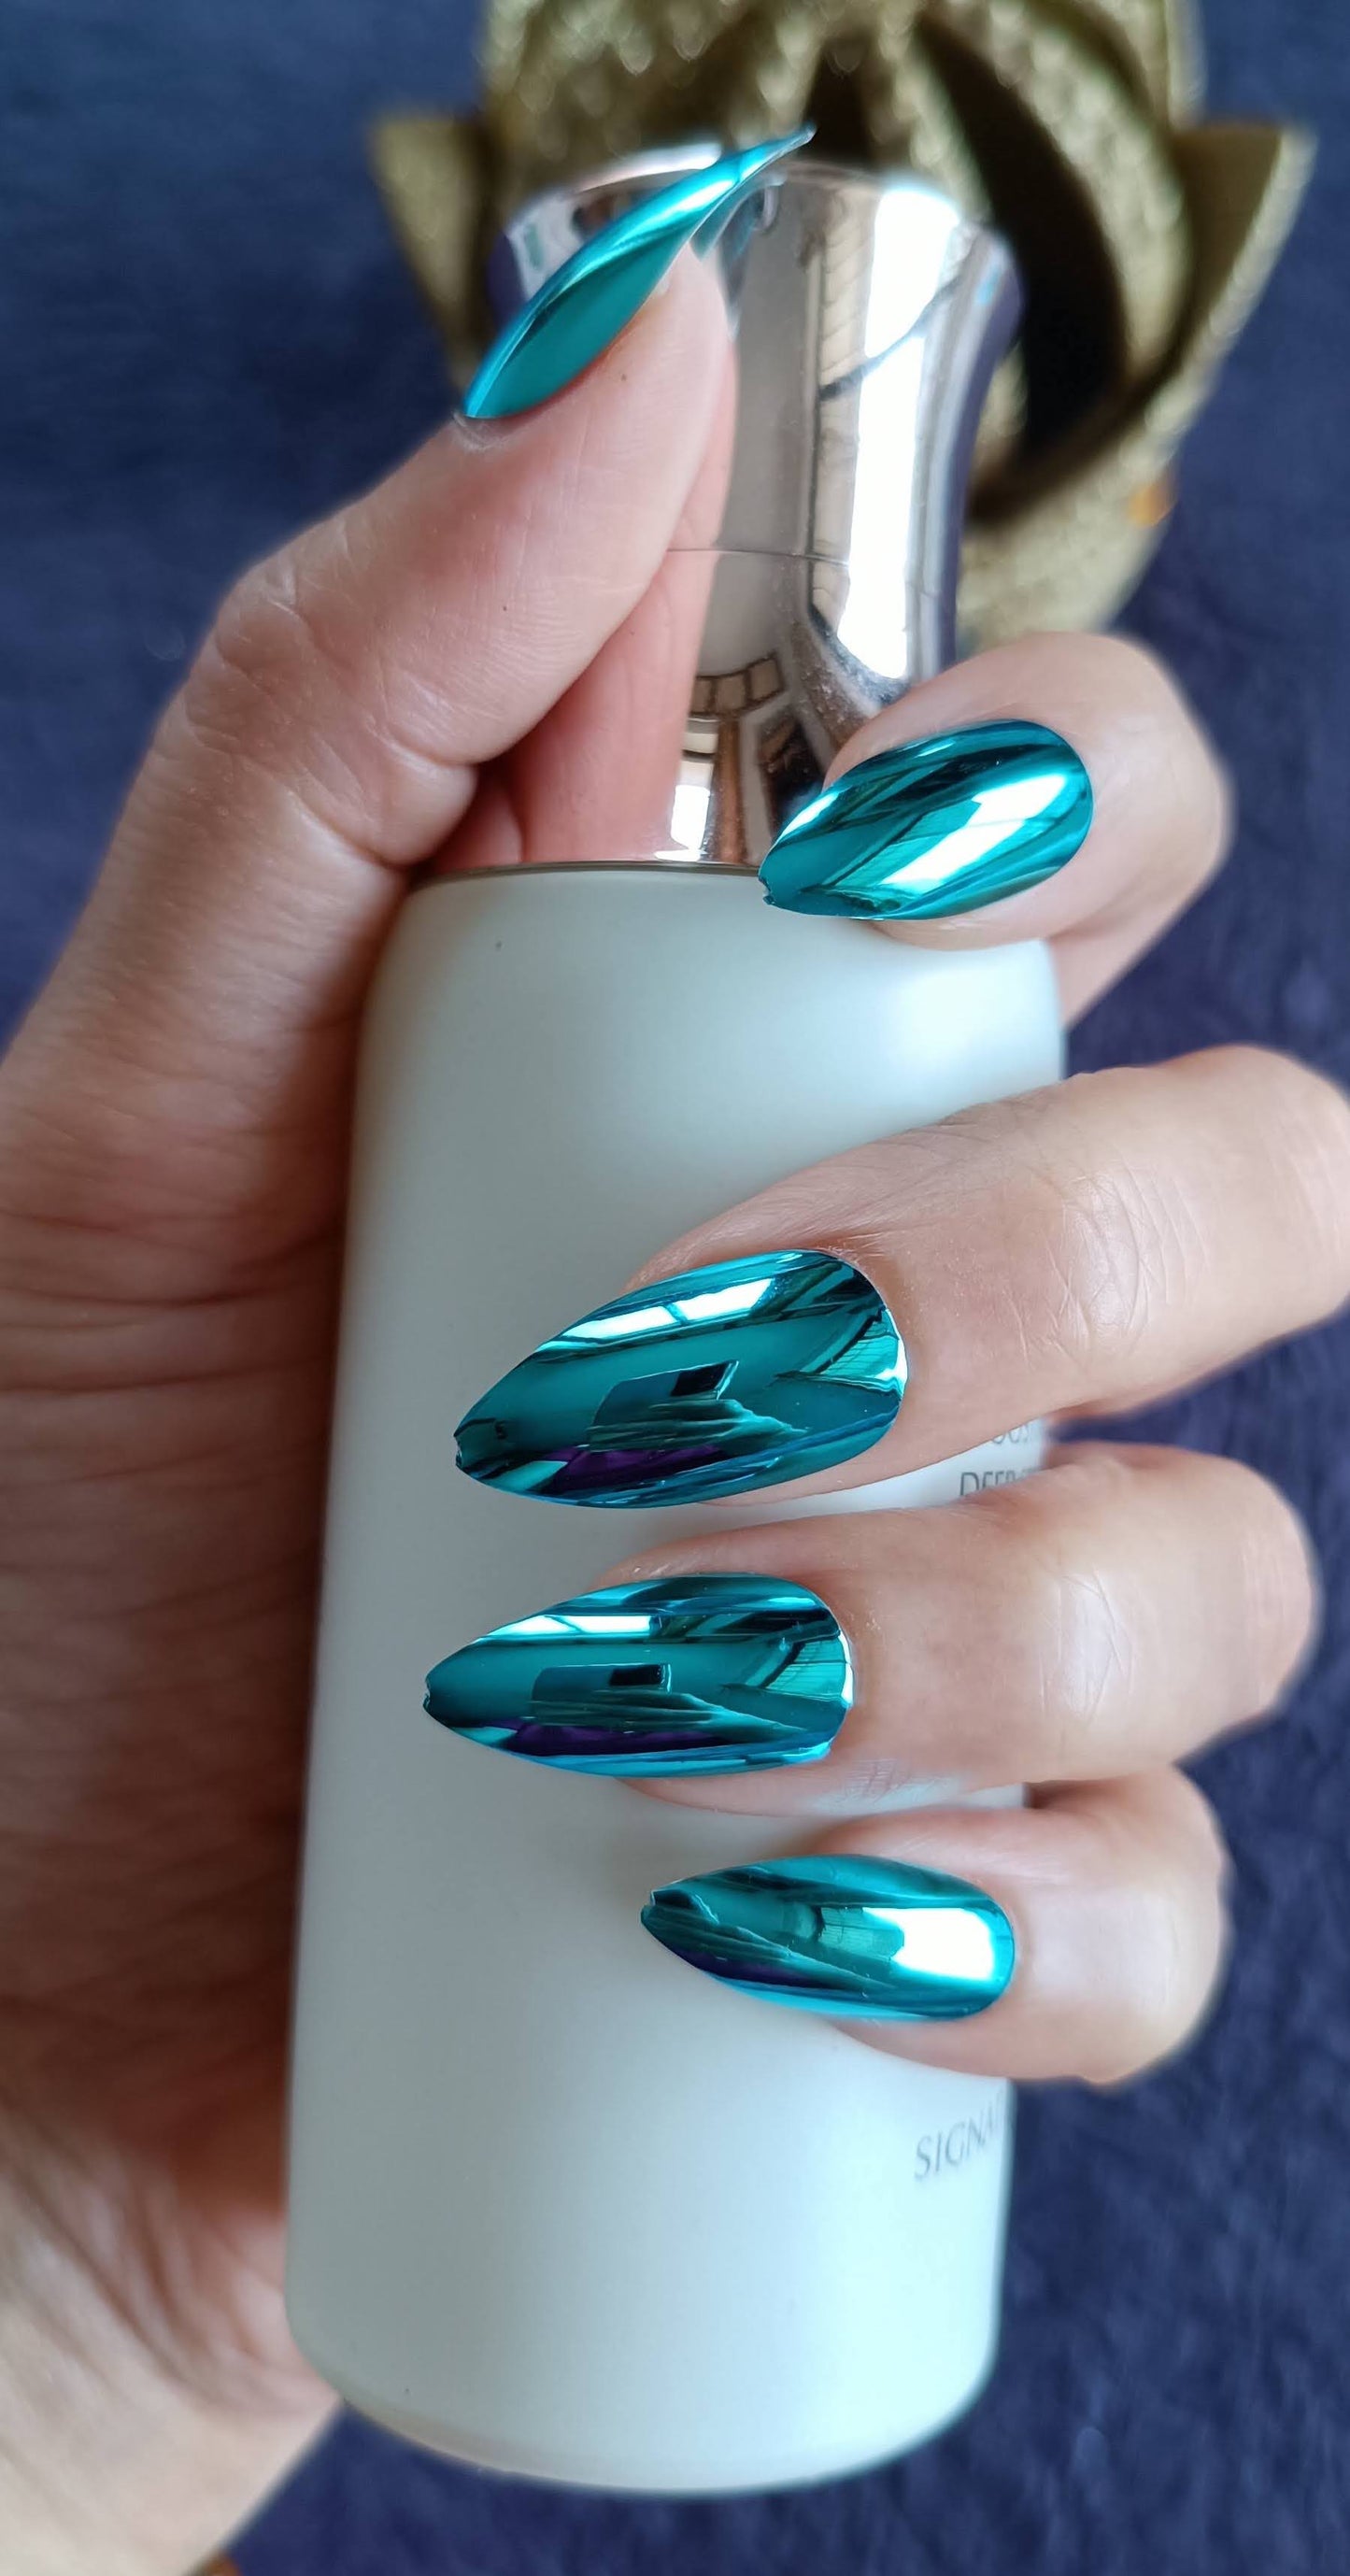 Acrylic/ Press-on Designer Nails with Glue Tabs | Artificial Nails Under 100 - Almond Shaped Teal Chromatic